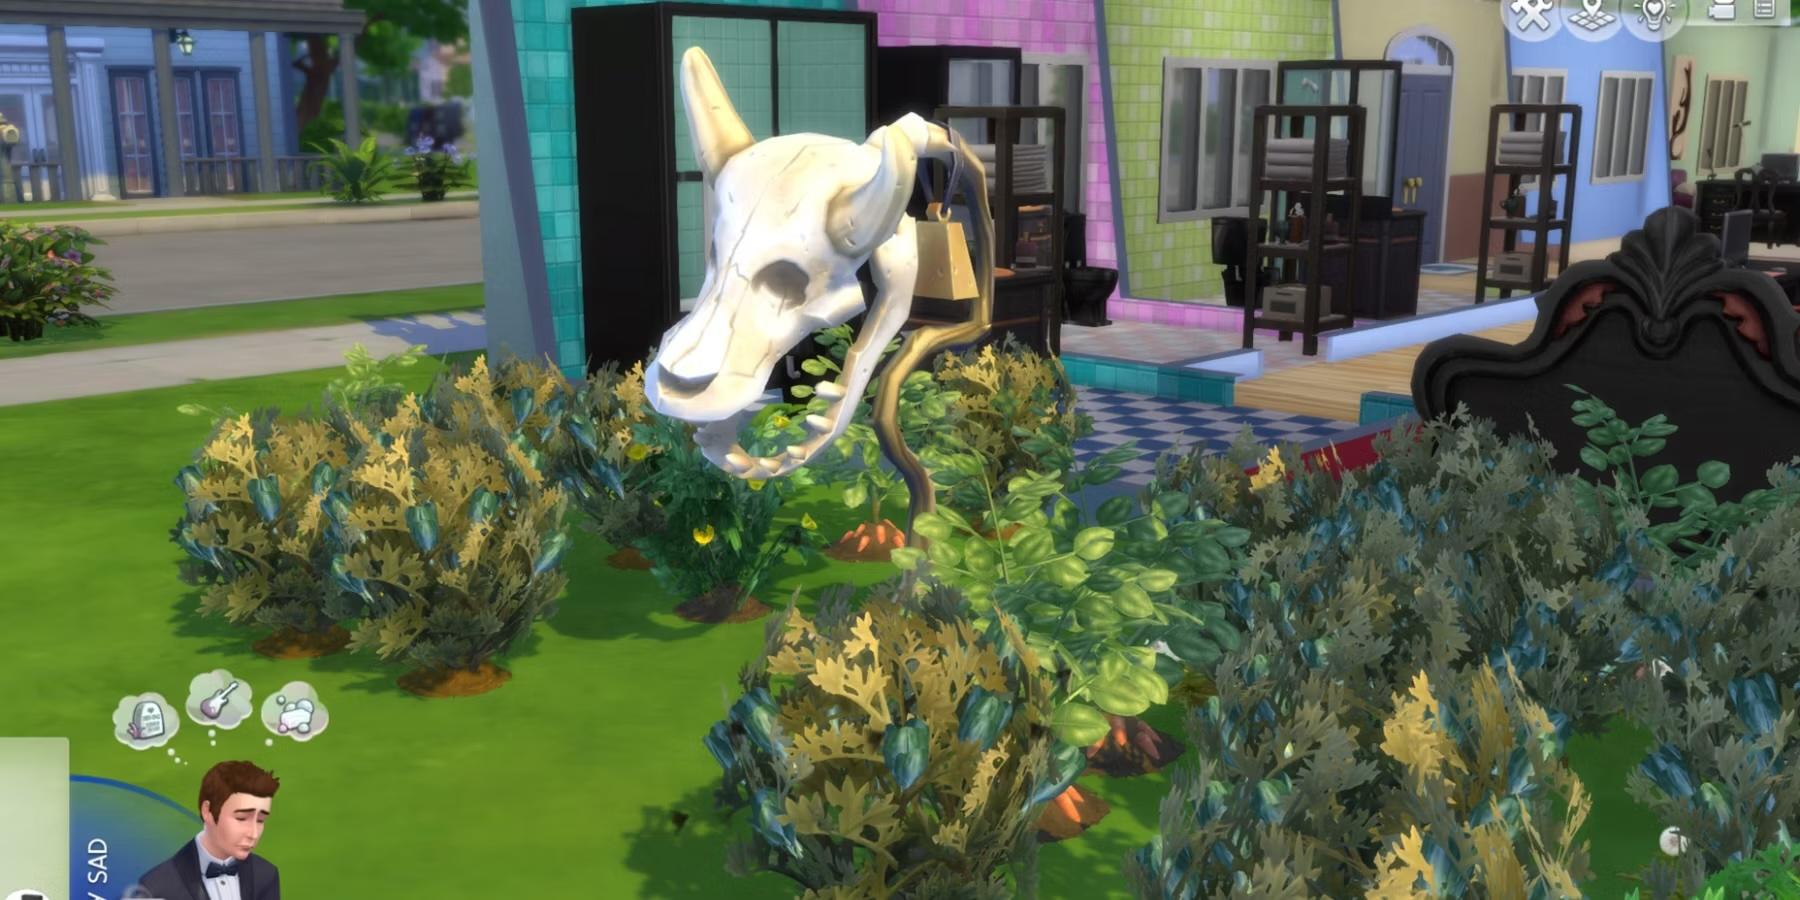 'The Sims 4' cowplant